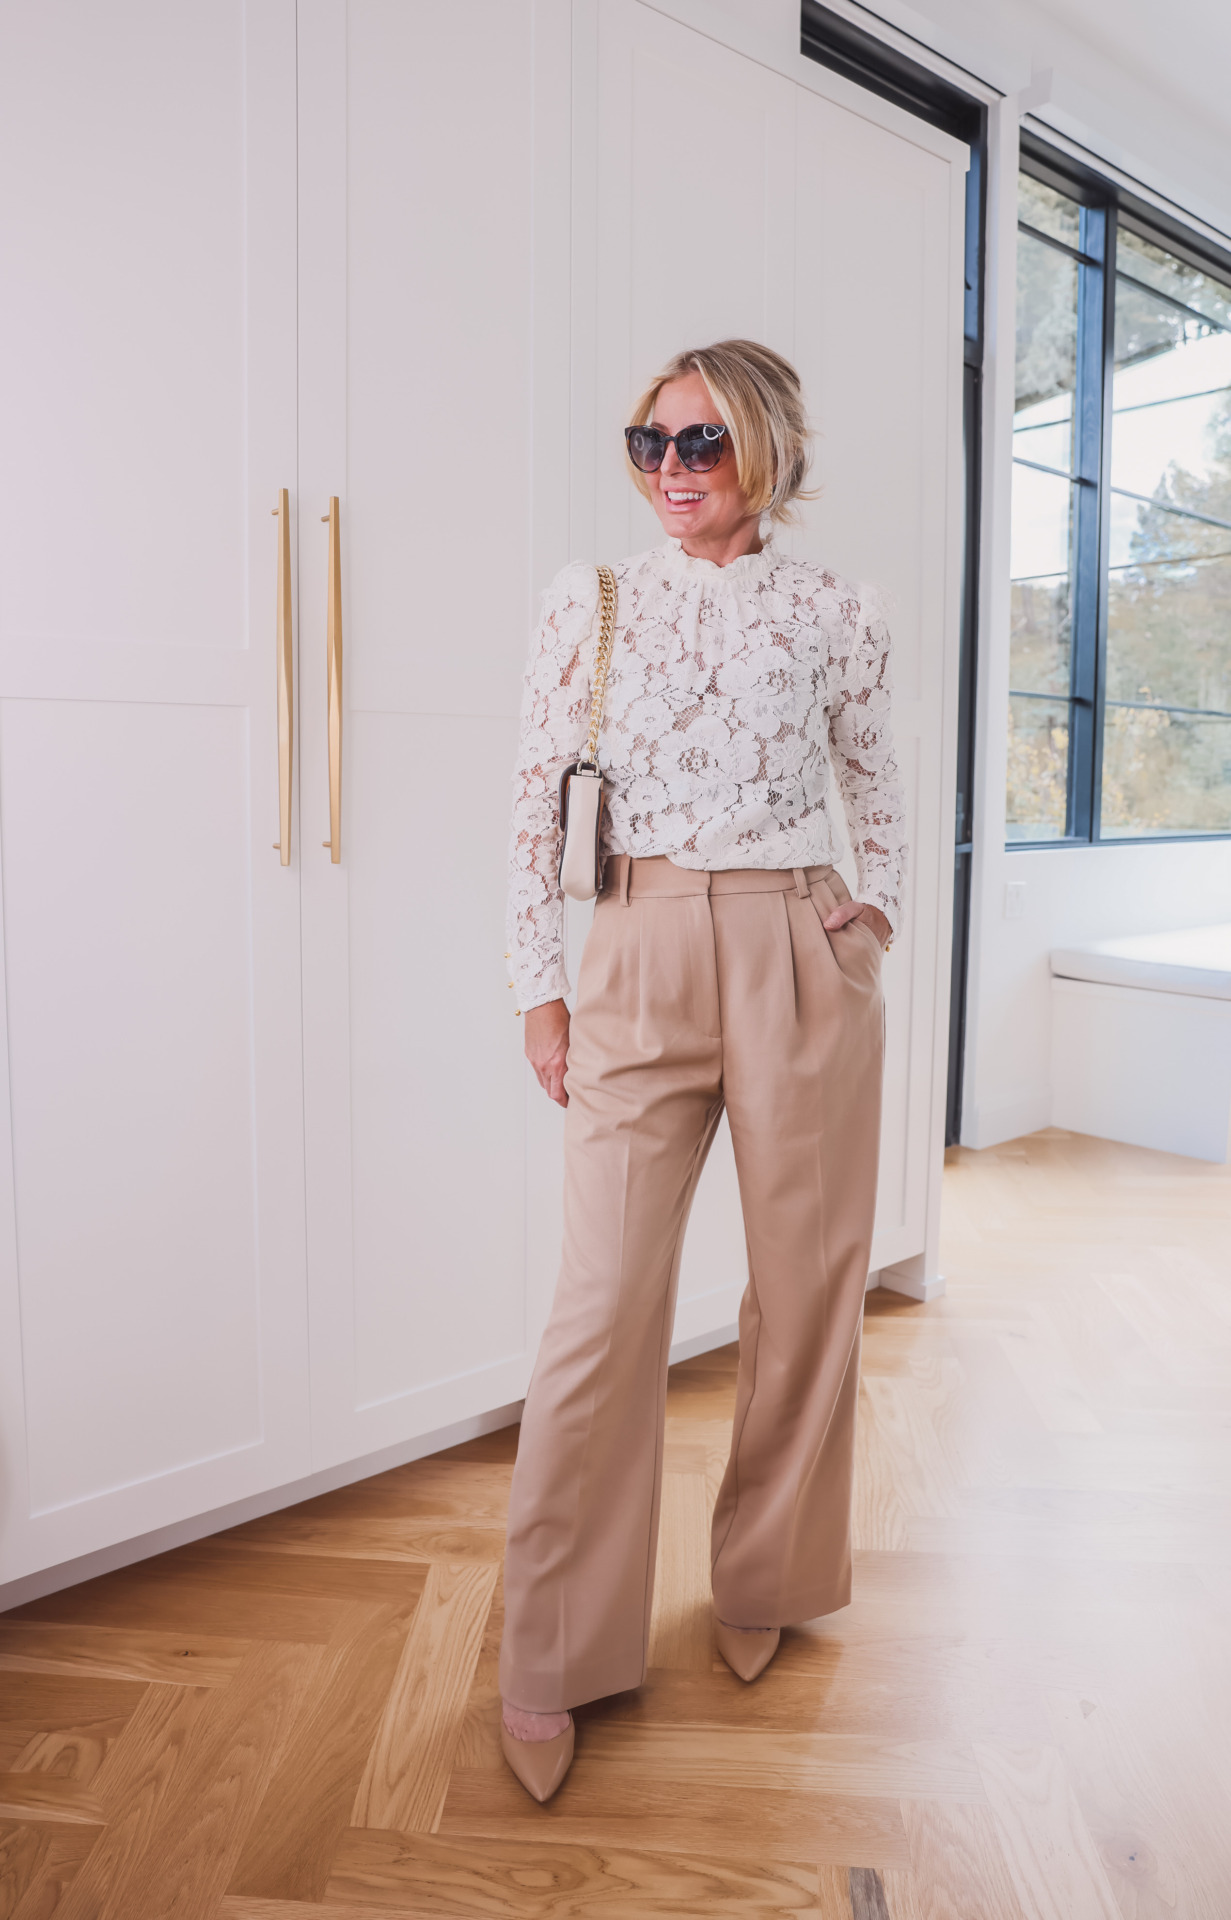 https://rstyle.me/+G549sNdFdbDQEUhaXWr8KQ, how to wear pleated pants, ways to wear pleated pants, ways to style pleated pants, how to style pleated pants, pleated trousers women, pleated pants over 40, favorite daughter pleated pants, pleated pants 2023, pleated pants outfits, erin busbee, busbee style, fashion over 40, wayf lace emma top, sam edelman beige hazel pumps, le spec sunglasses, marc jacobs tri-color handbag